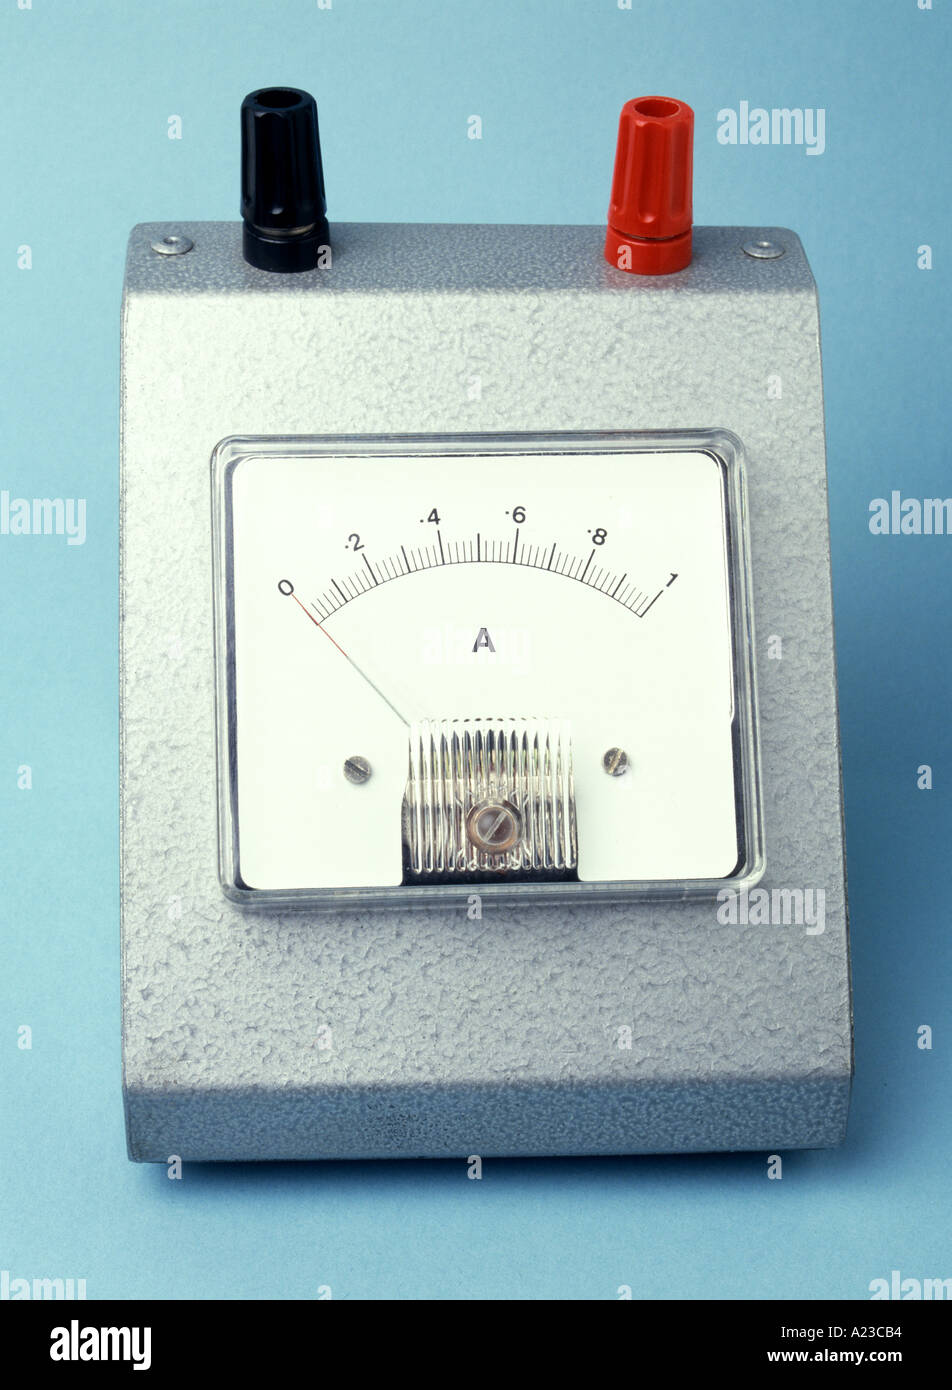 an analogue ammeter scale 0-1A needle on zero Stock Photo